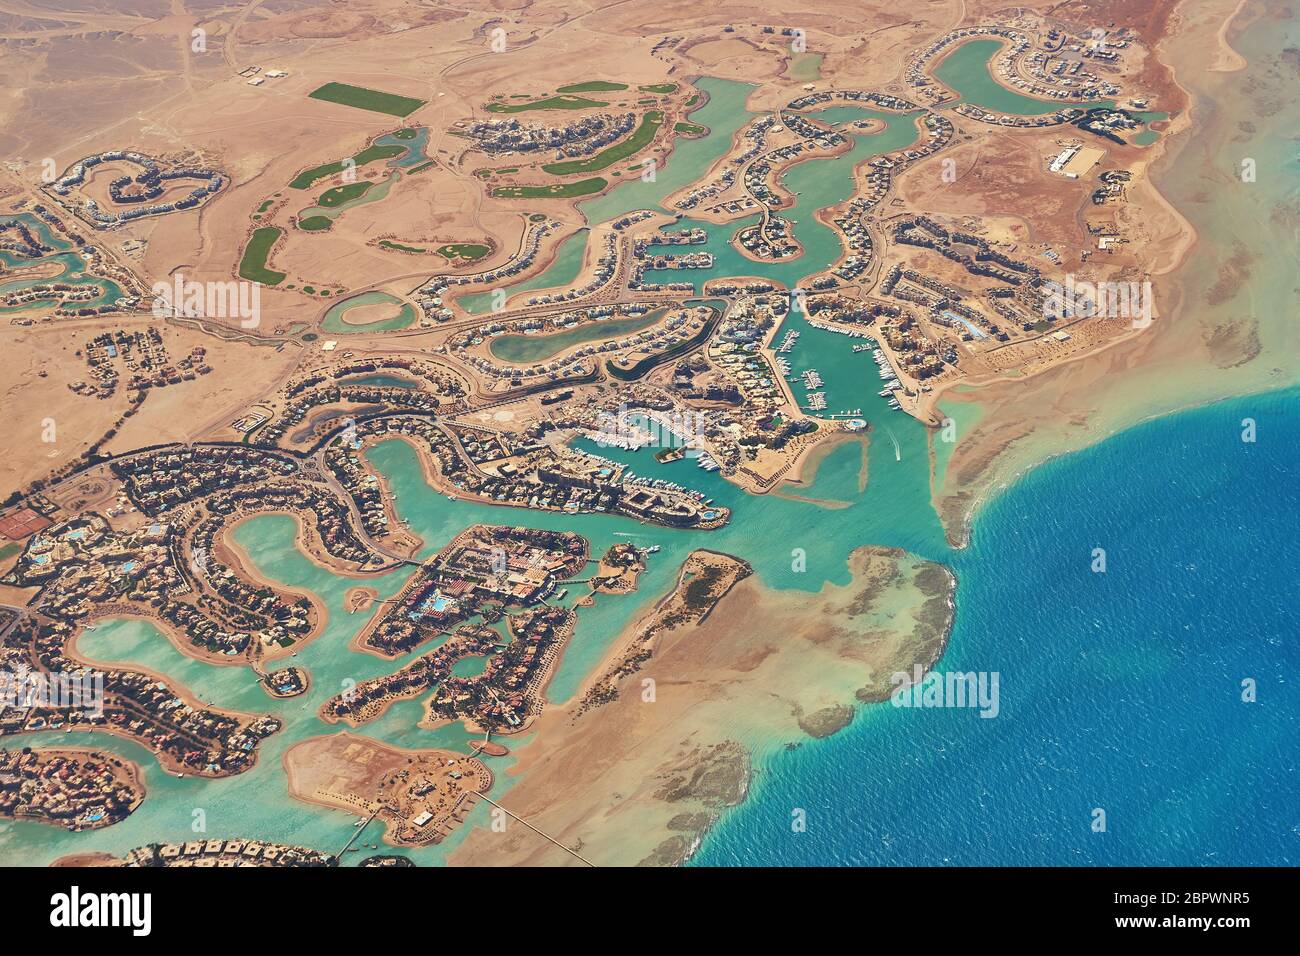 Aerial view of El Gouna a luxury Egyptian tourist resort located on the Red Sea 20 kilometres north of Hurghada. Stock Photo